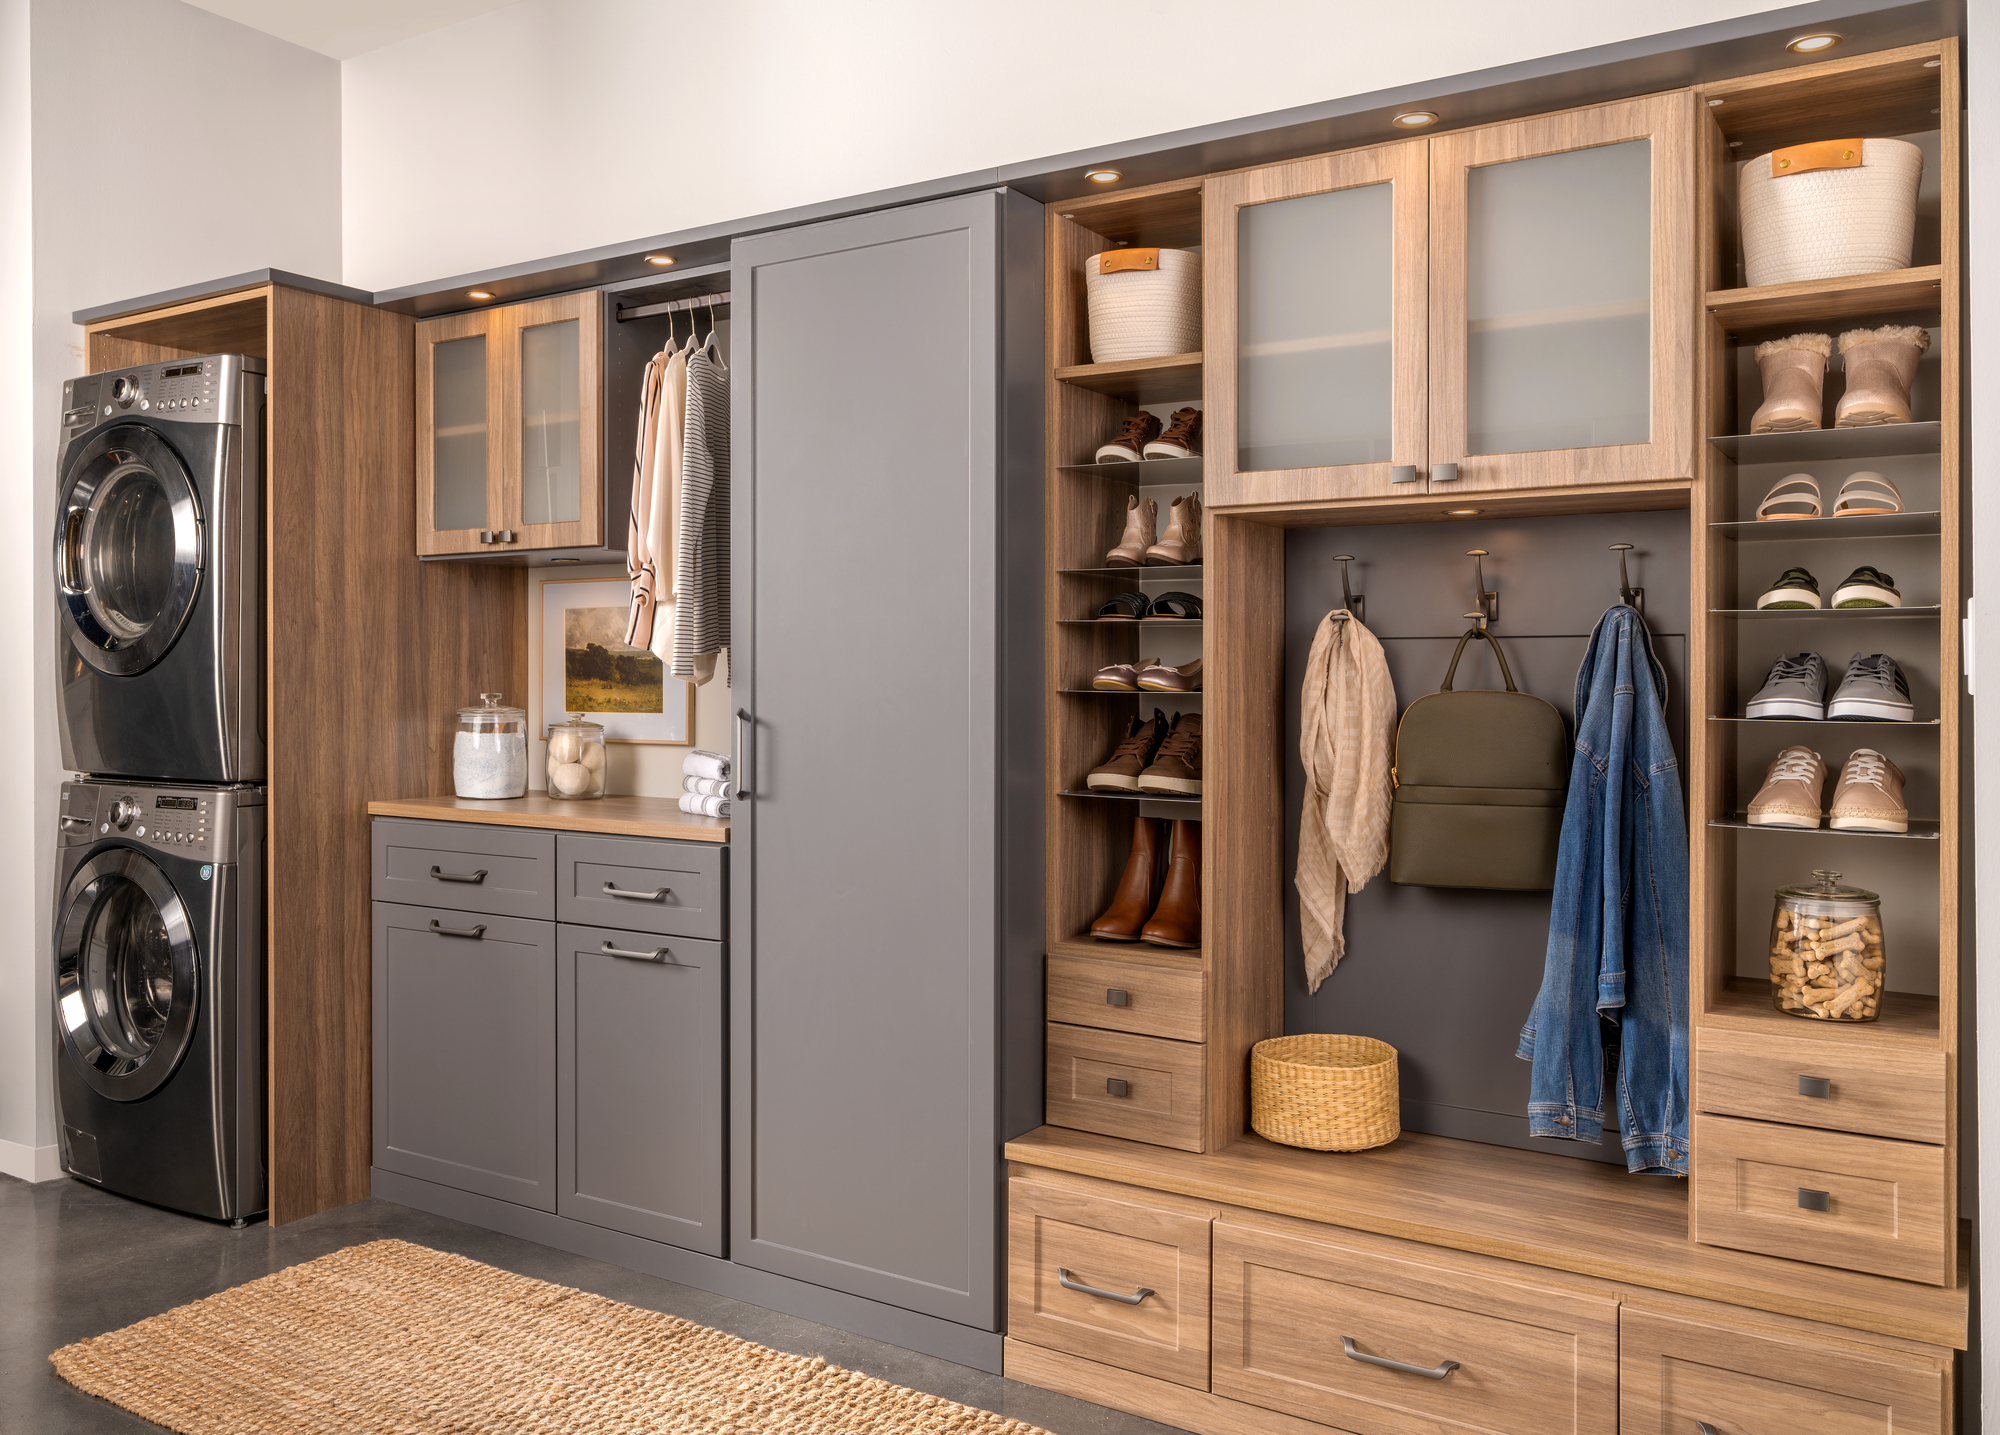 Laundry room and mudroom shared space with storage cubbies from Inspired Closets